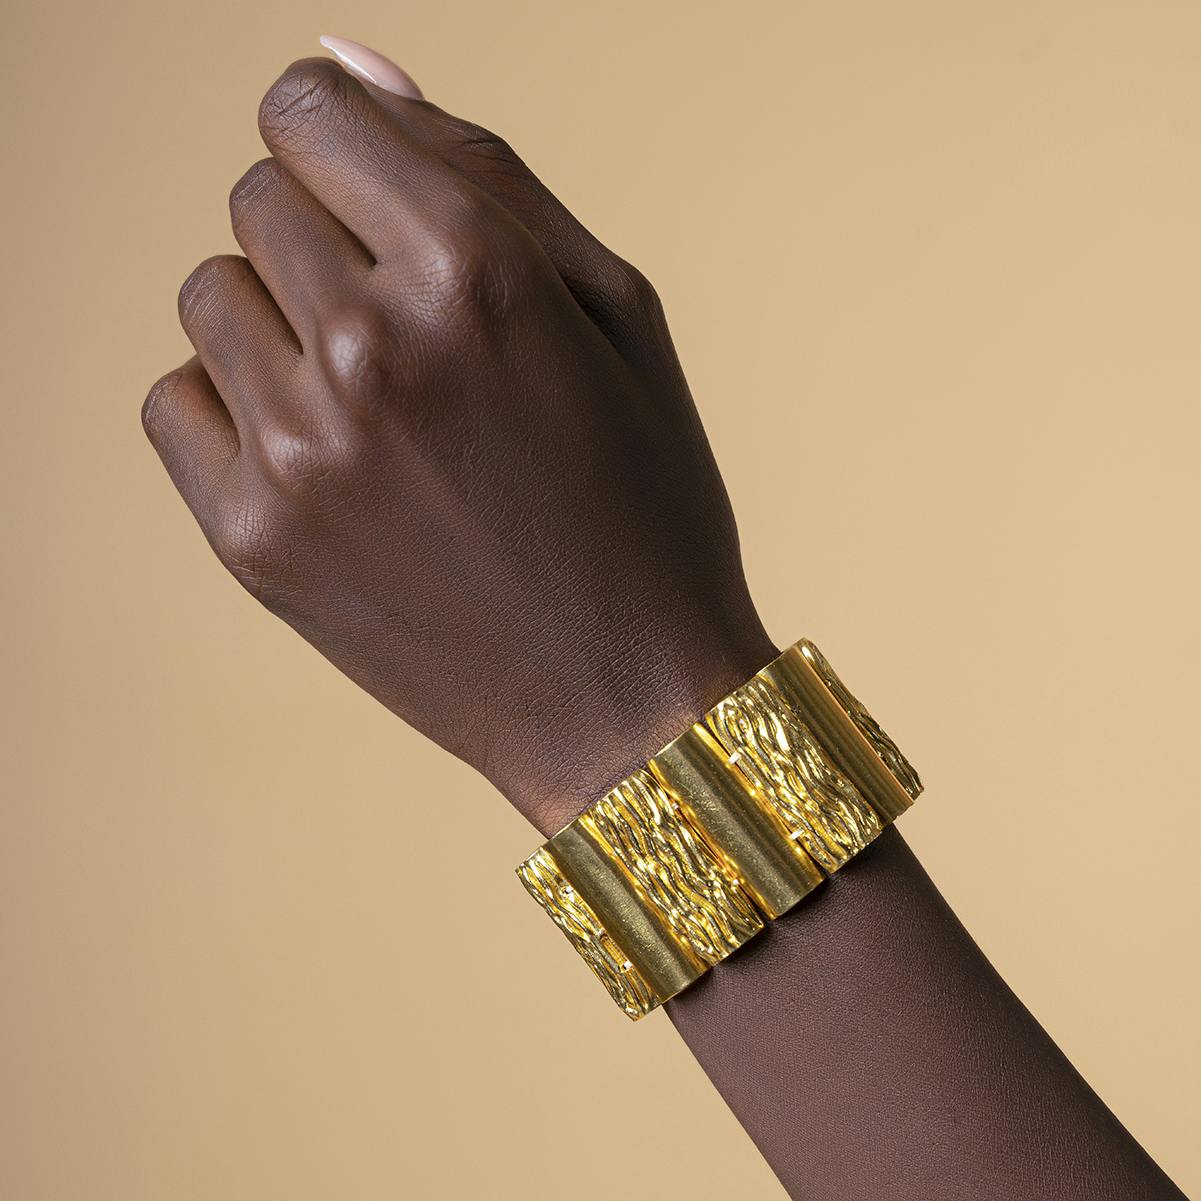 BINARY LOG BRACELET GOLD TONE , a product by Equiivalence